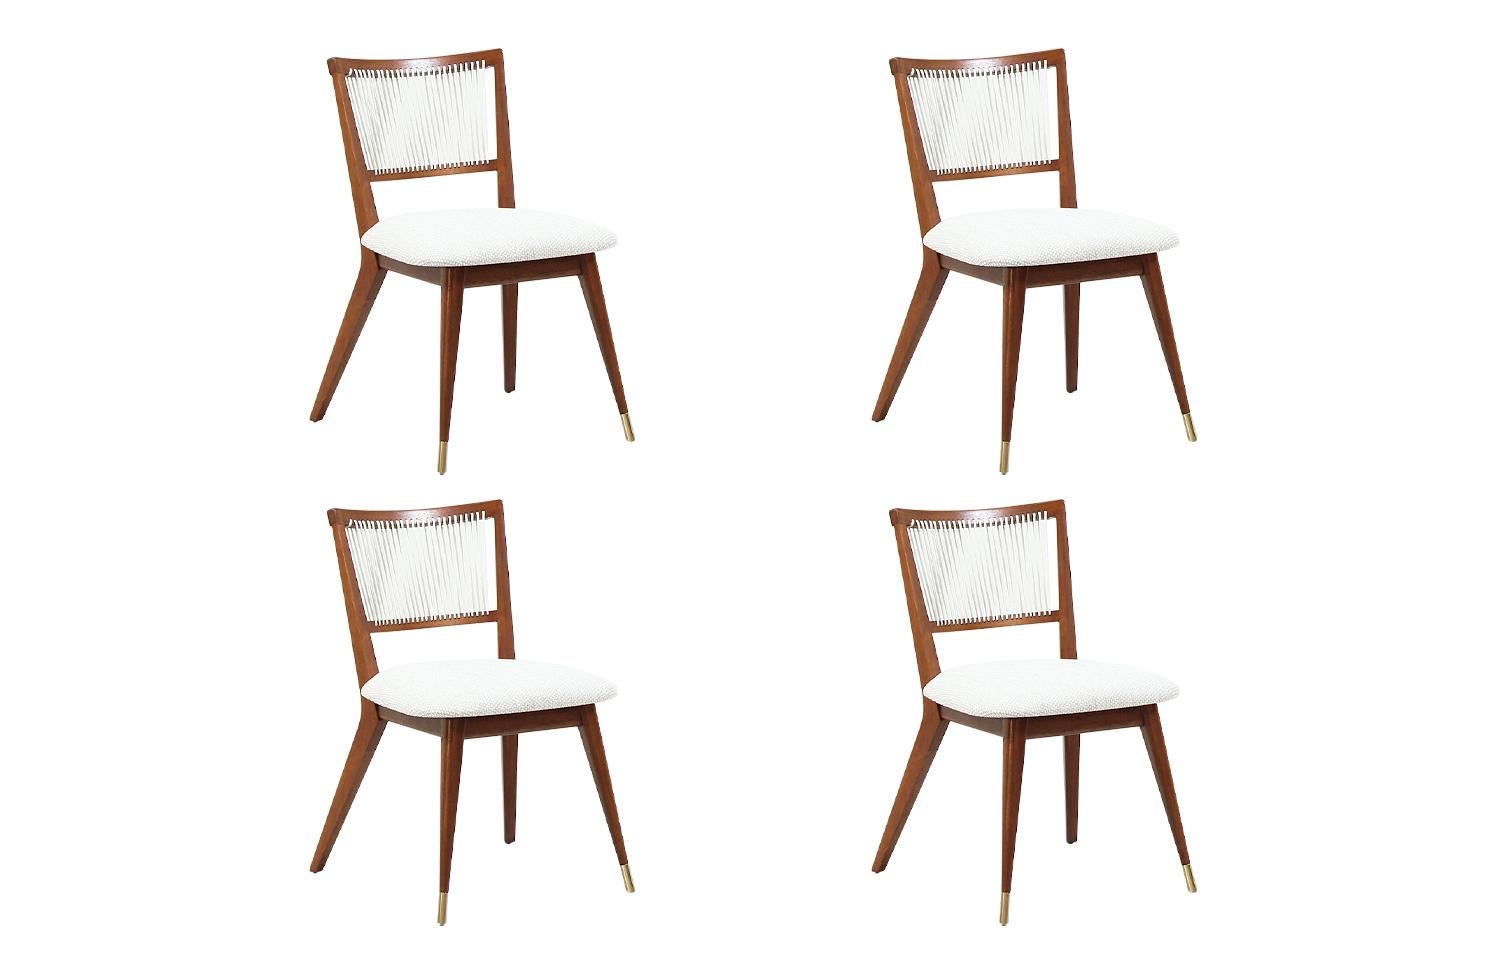 Set of four Mid-Century Modern dining chairs designed by John Keal for Brown Saltman in the United States, circa 1960s. These newly refinished chairs feature a sturdy walnut wood frame with brass sabots at the front legs and new light tweed fabric